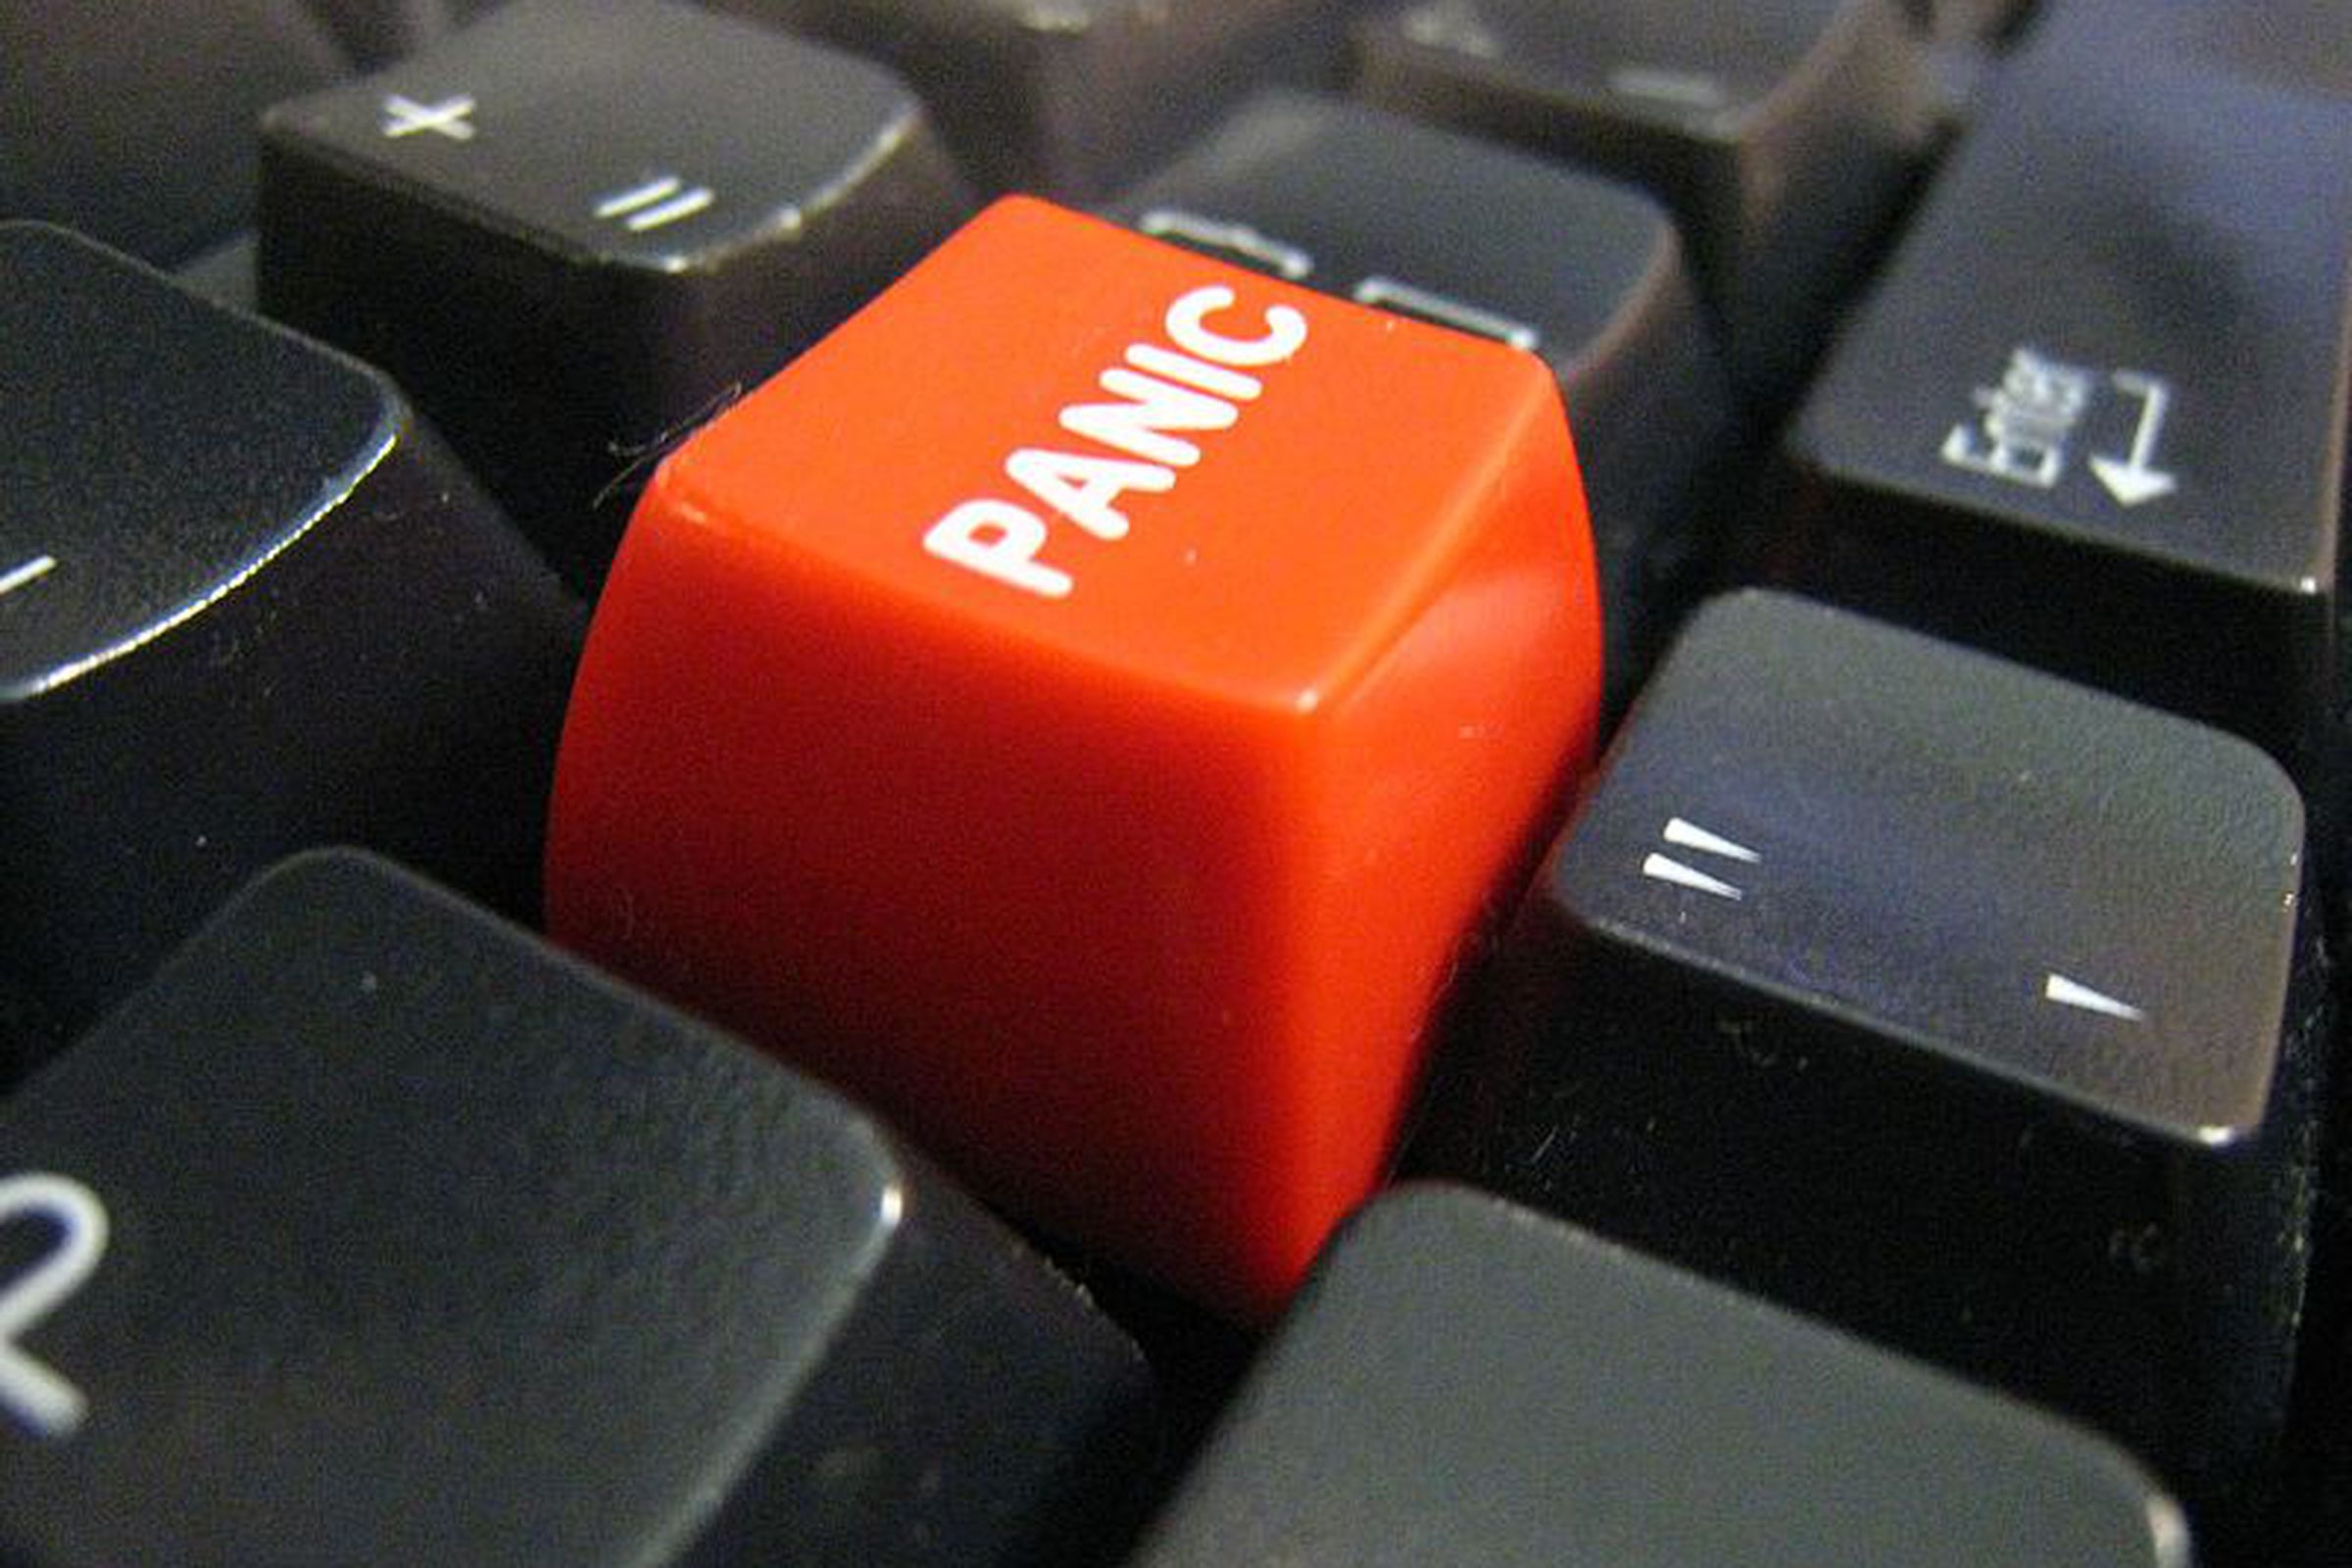 Panic button (flickr attribution)